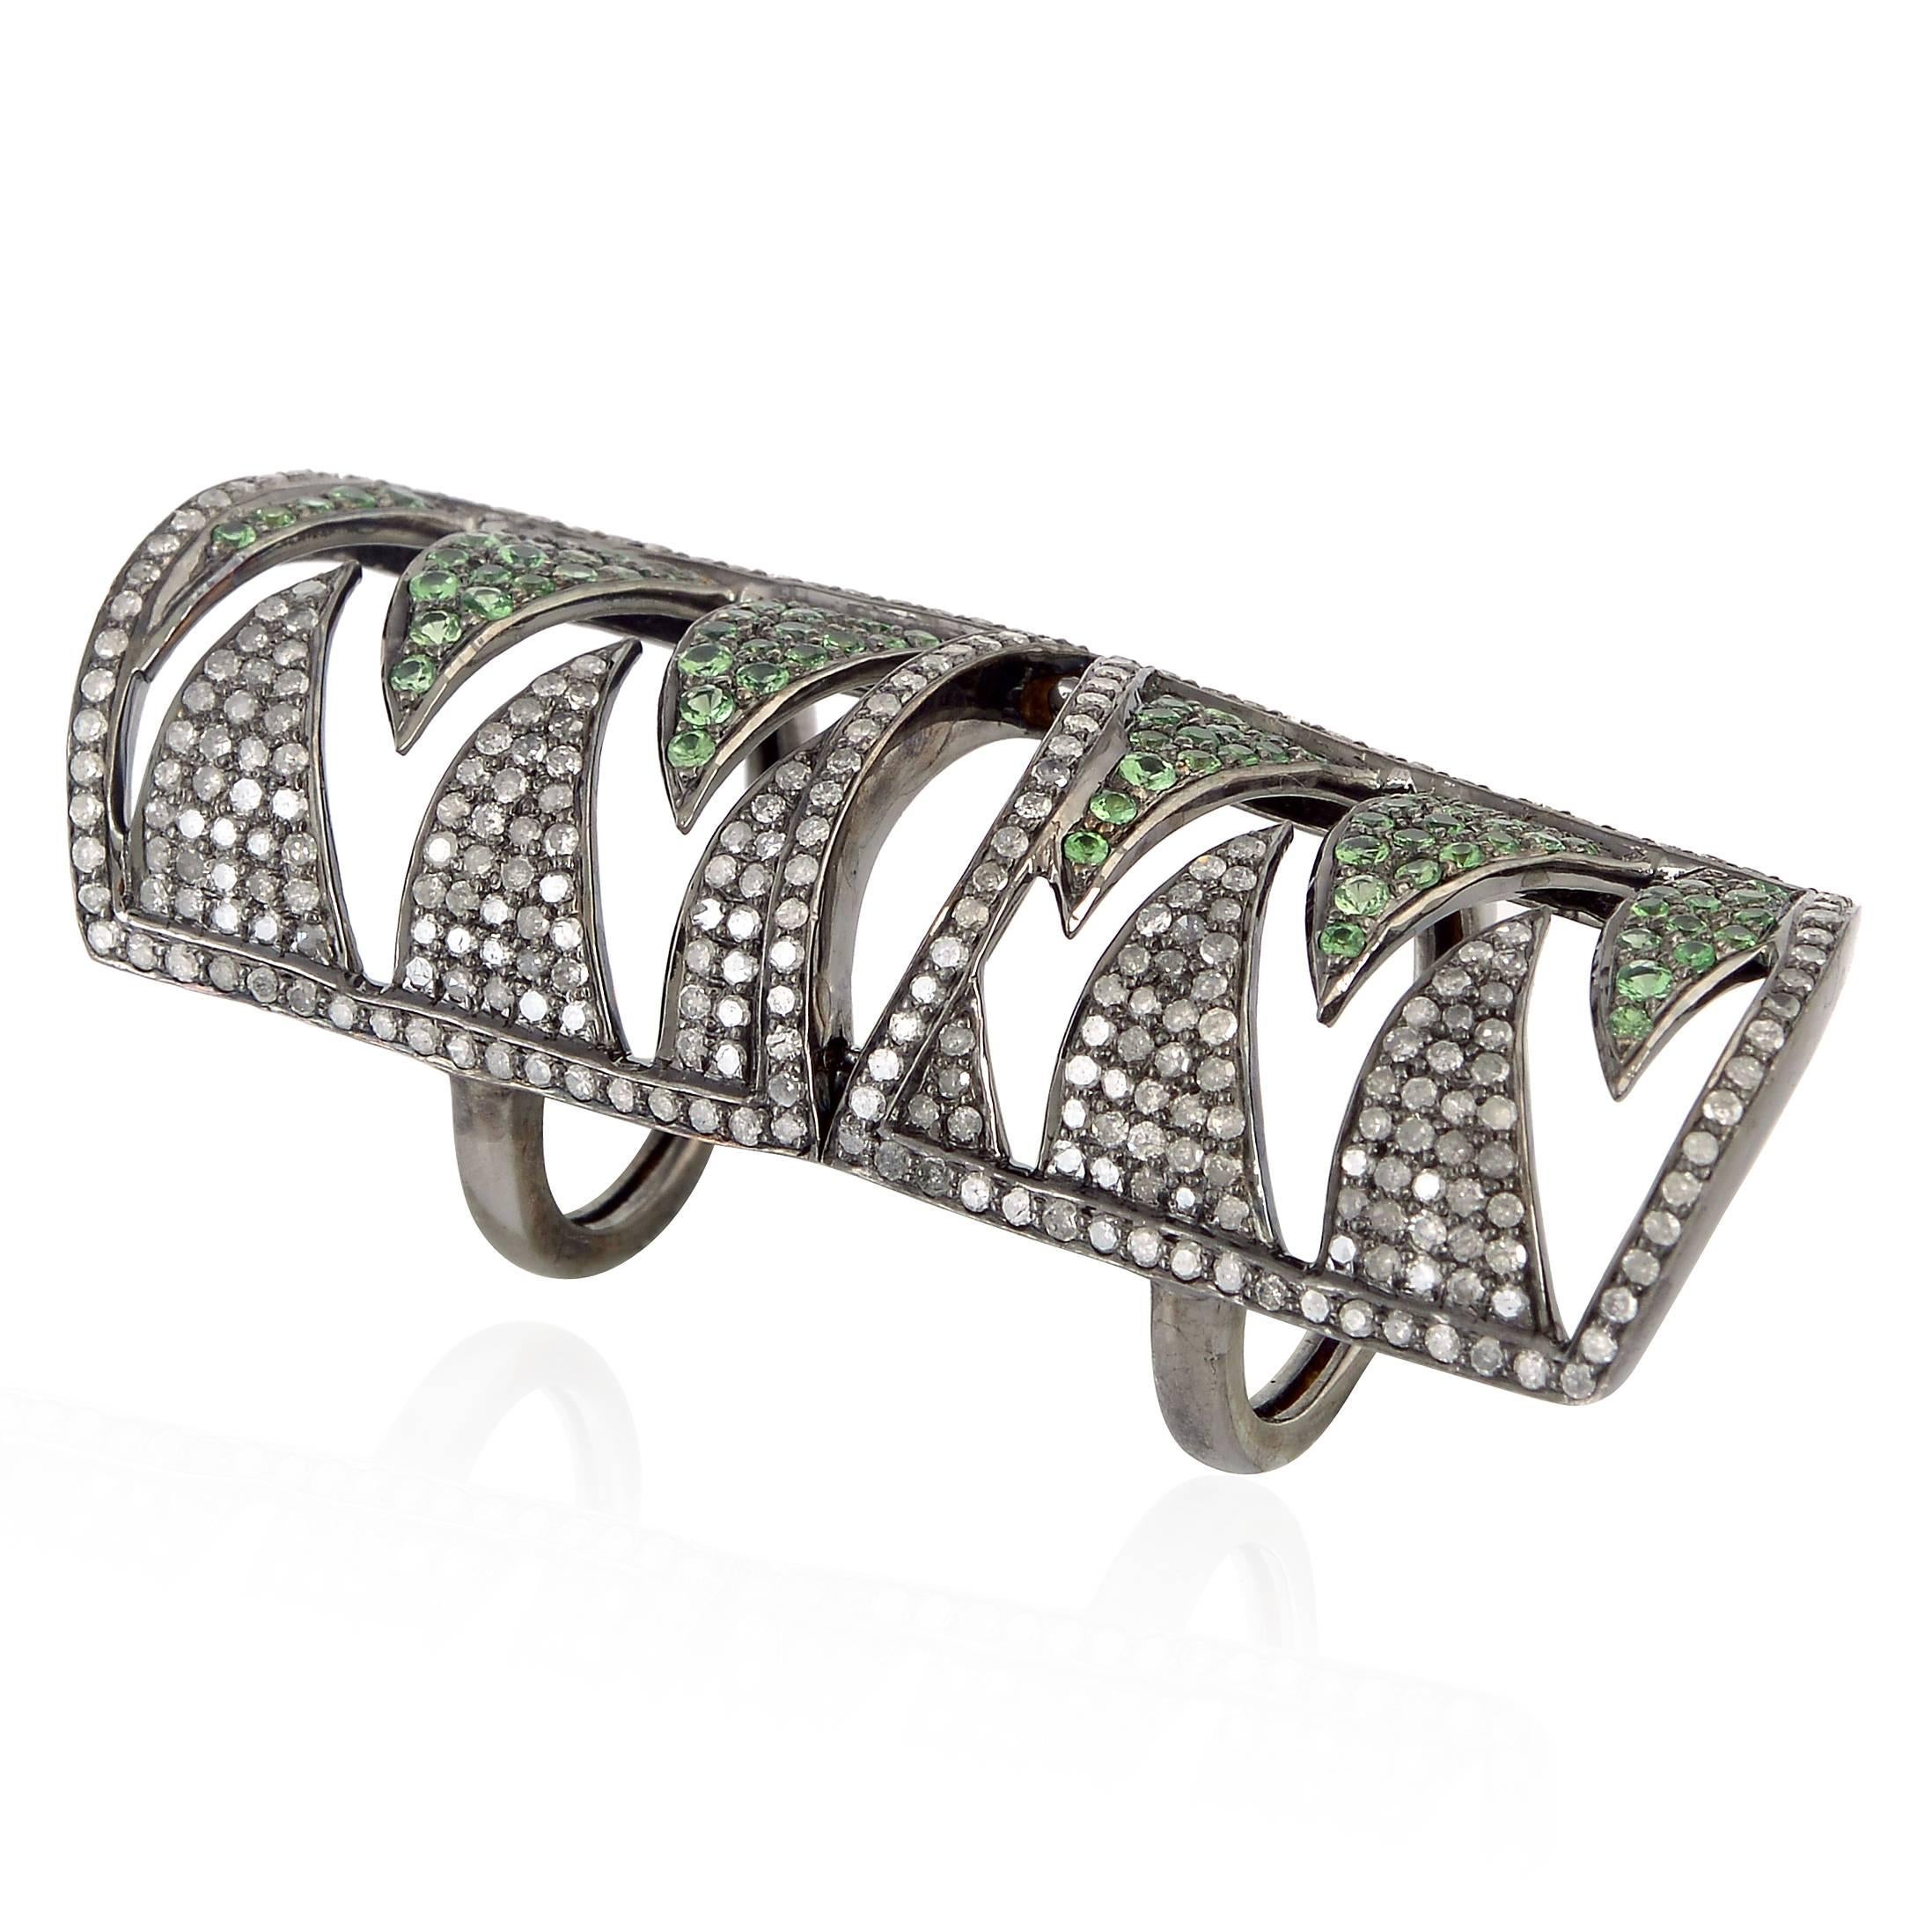 Handcrafted in 18K and sterling silver. It is set in 1.25 carat tsavorite and 1.90 carat diamonds. Wear this dramatic piece to add edge to feminine cocktail outfits. This ring has a hinged in center so it's comfortable when bending the finger.